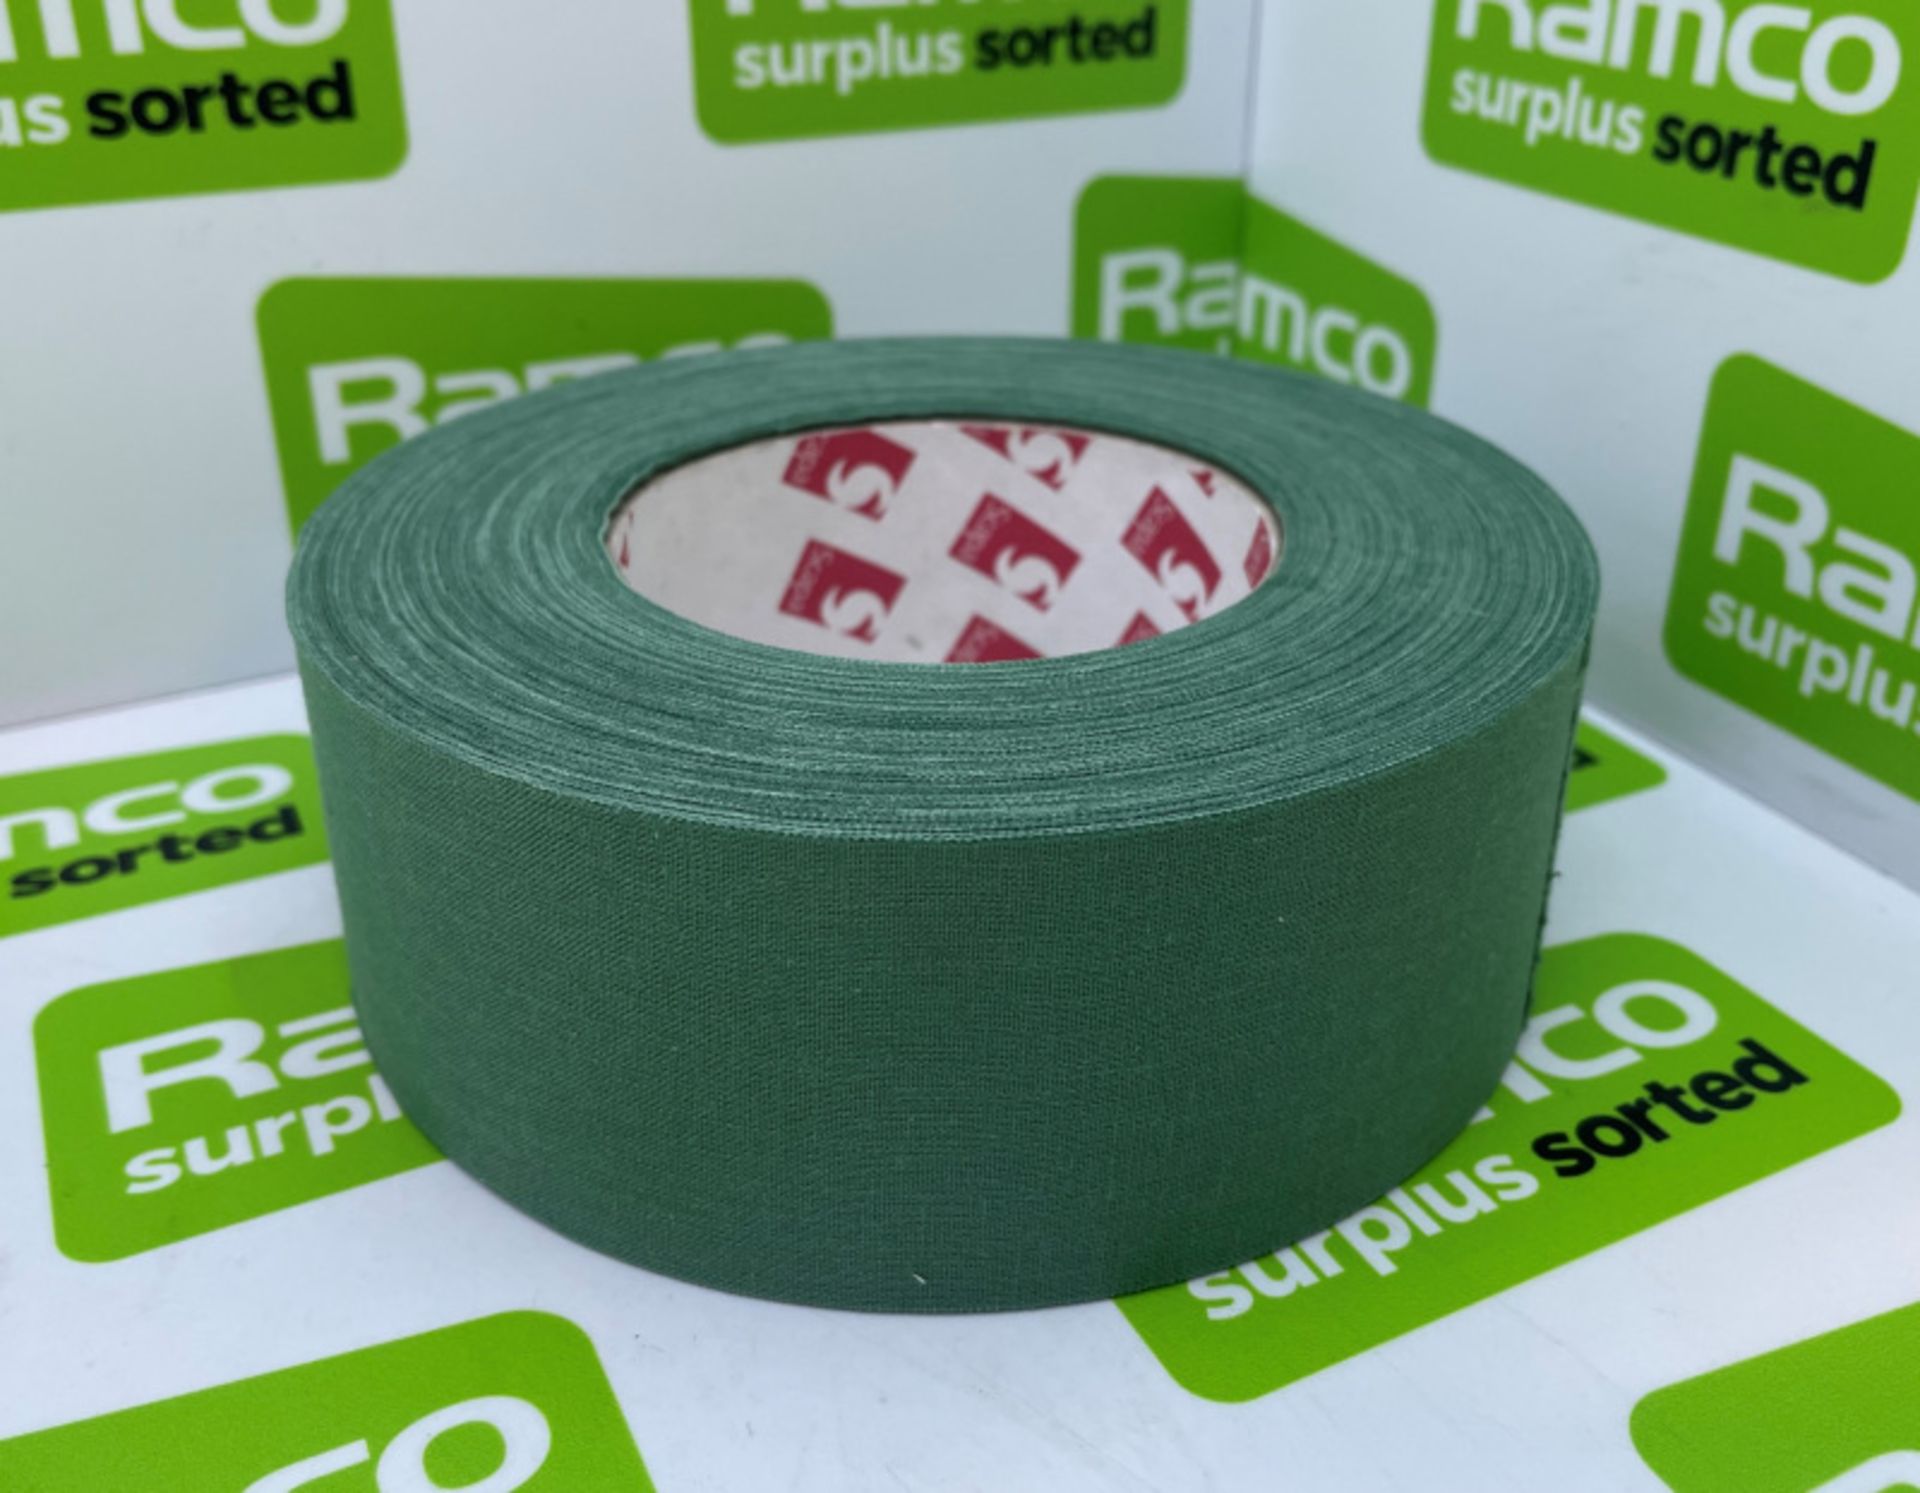 Scapa 3302 Pro Tape - Olive Green - 50mm x 50M rolls - 16 rolls per box - 37 boxes - Image 2 of 5